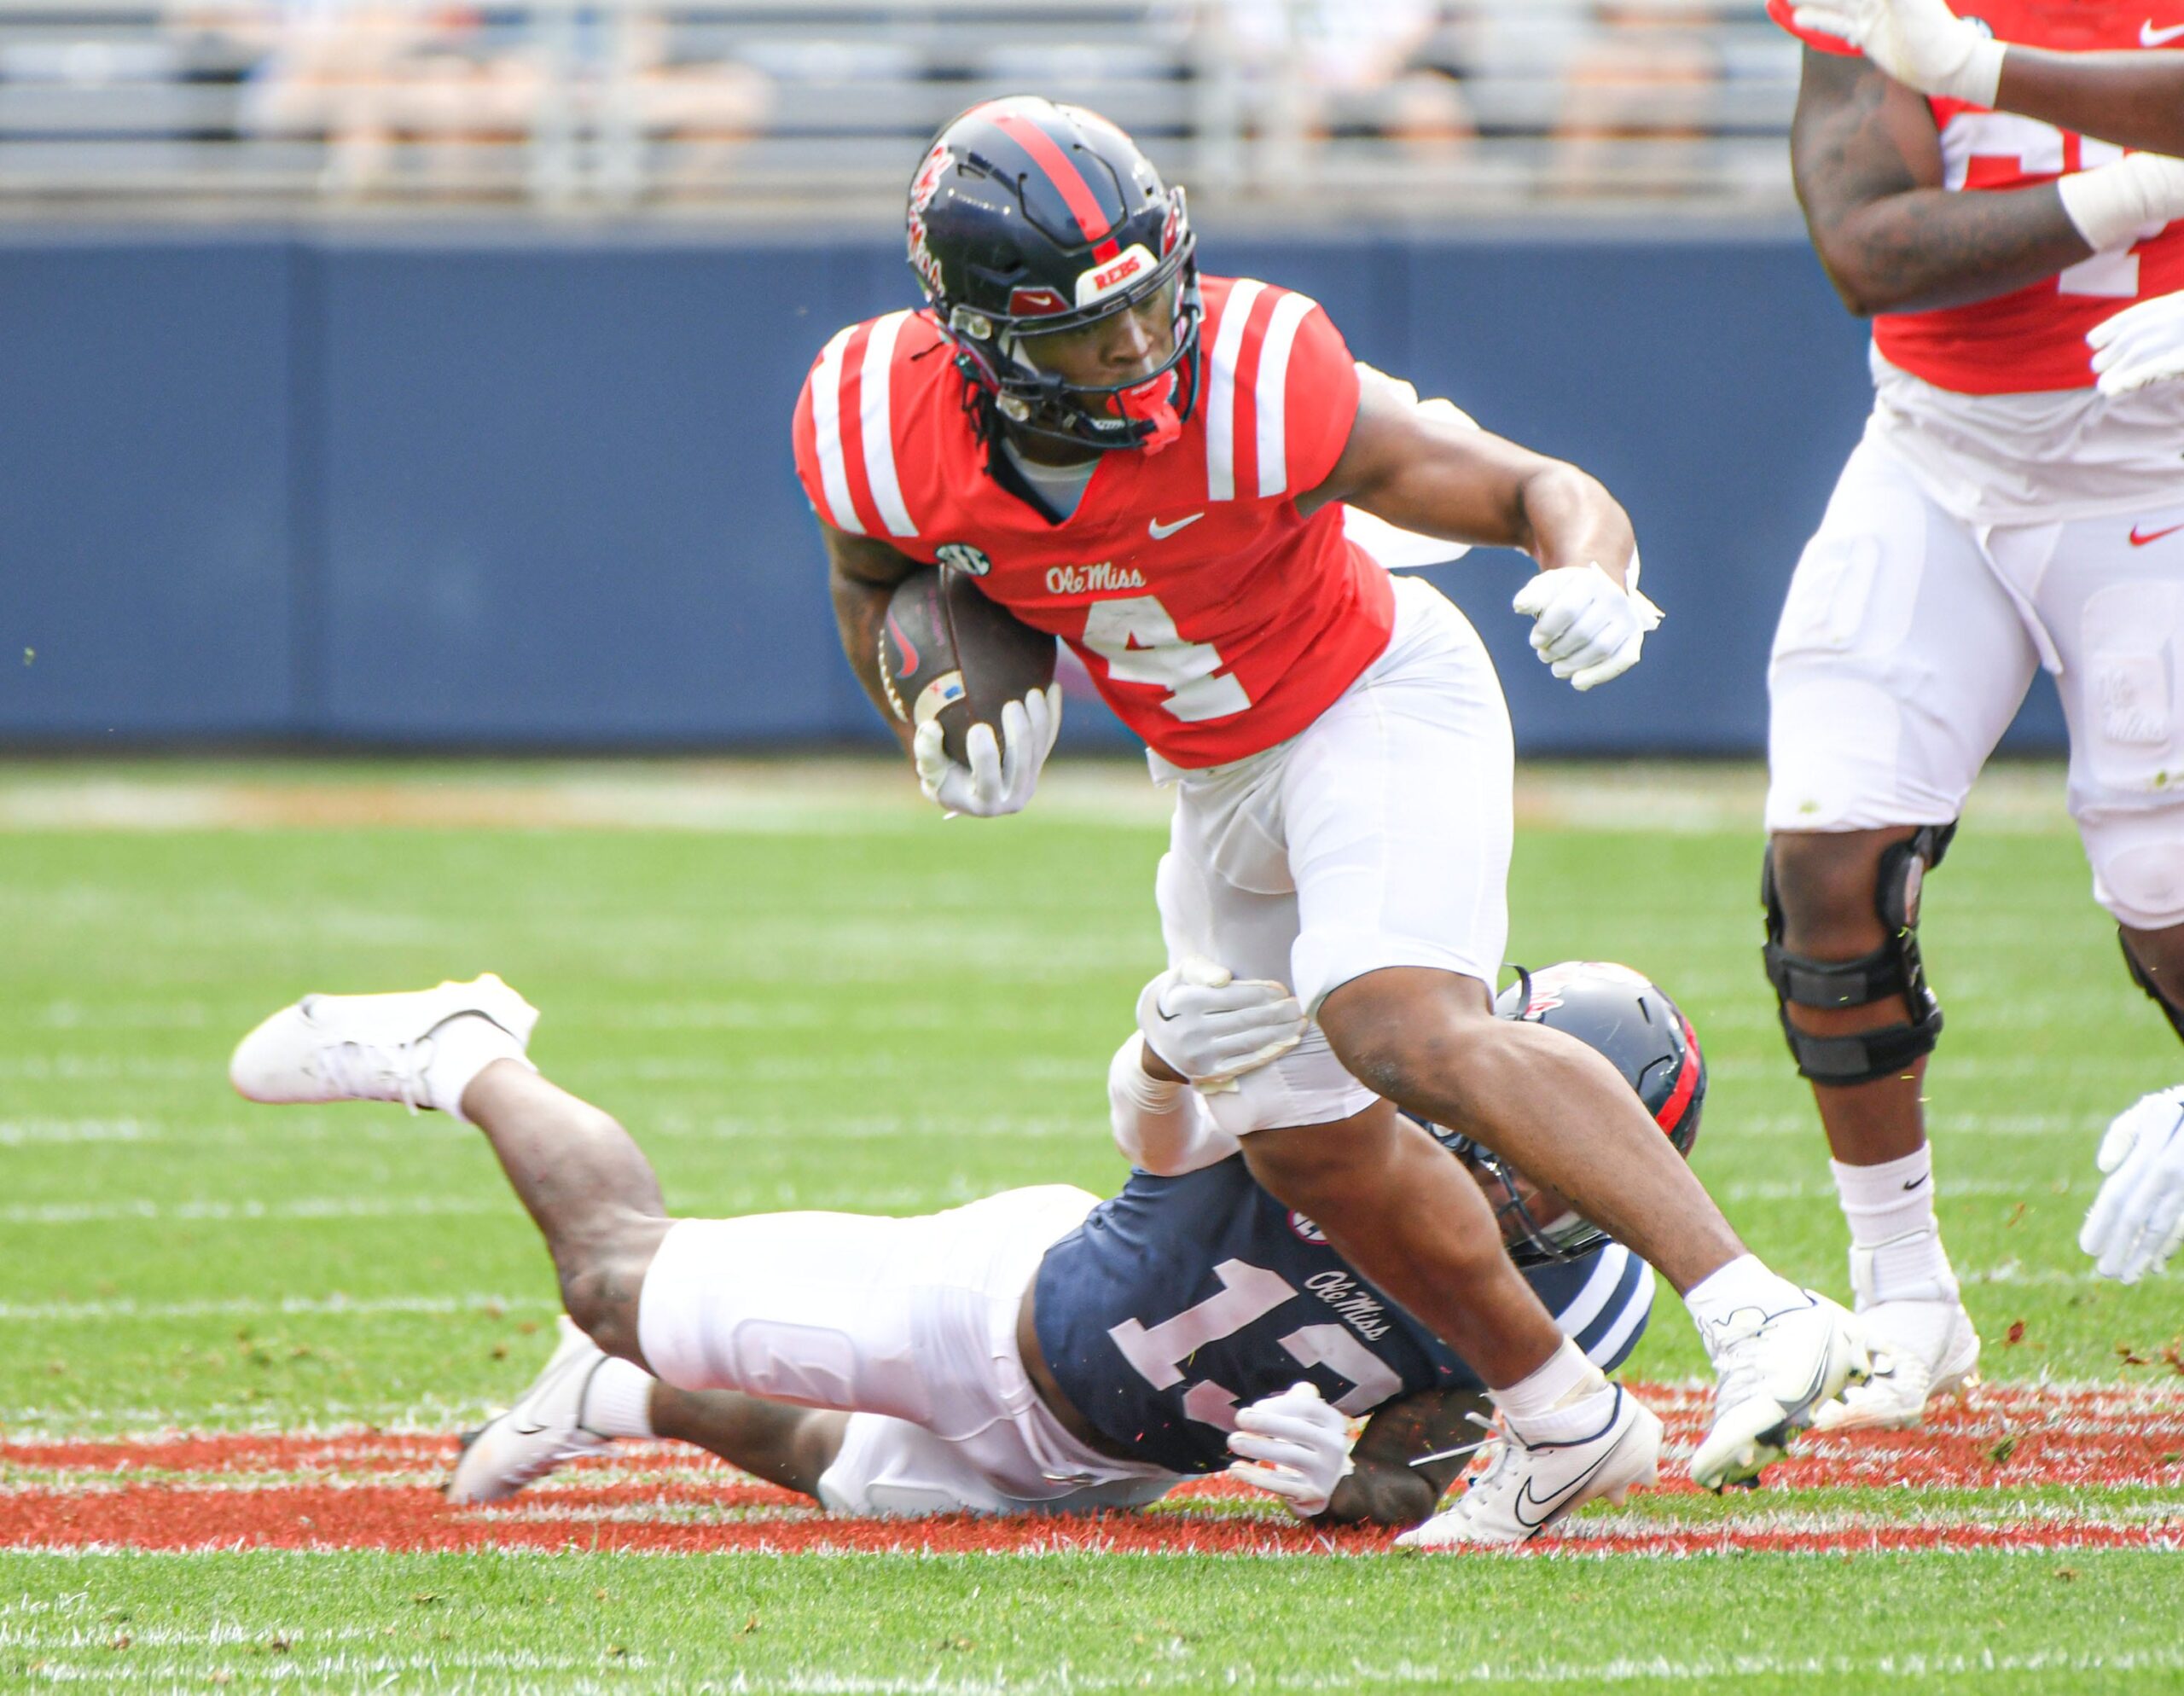 D.K. Metcalf out for remainder of Rebels' season - The Daily Mississippian